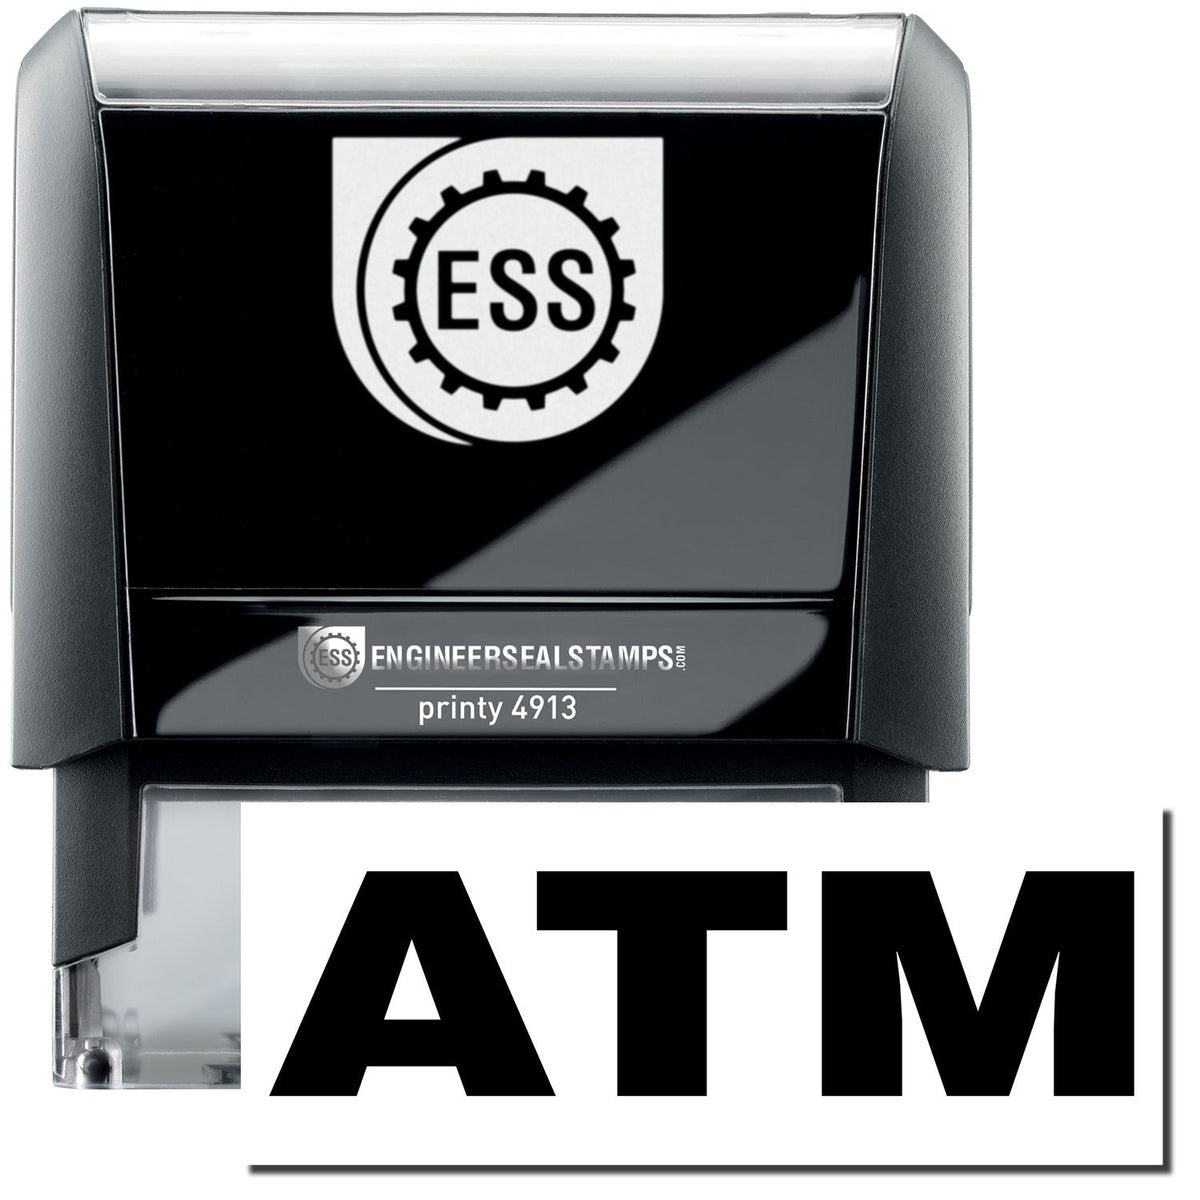 A self-inking stamp with a stamped image showing how the text &quot;ATM&quot; in a large bold font is displayed by it.